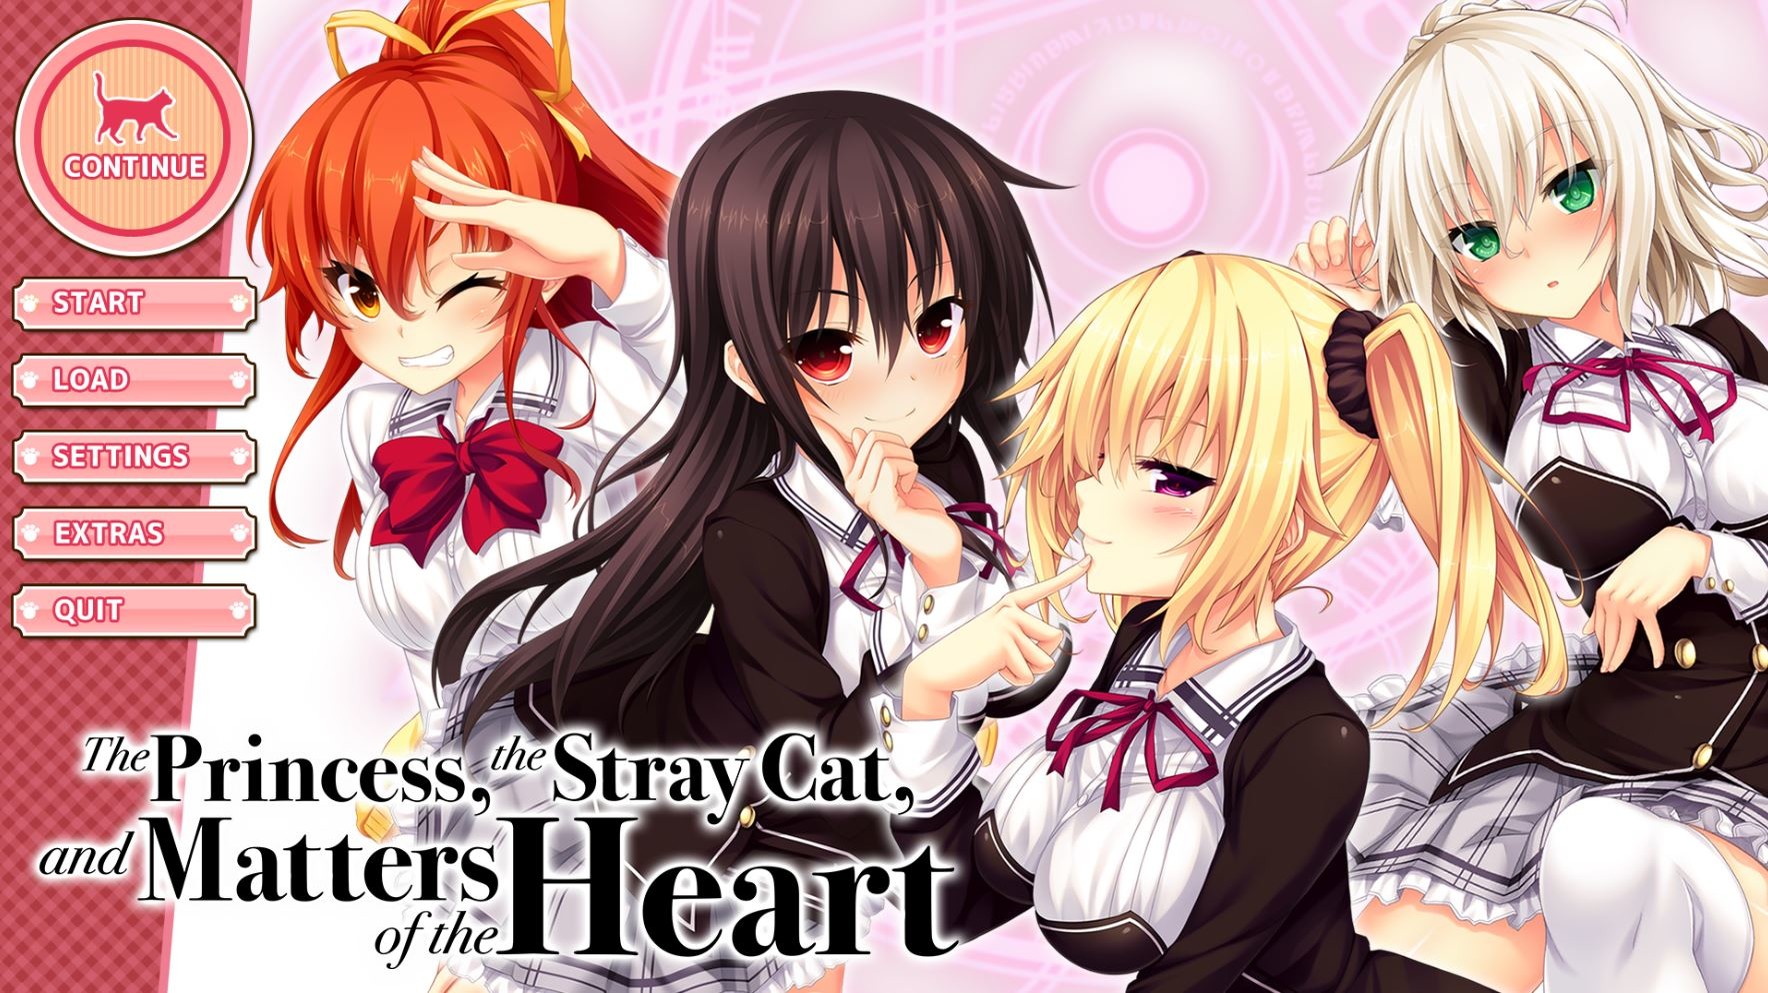 The Princess, the Stray Cat, and Matters of the Heart screenshot